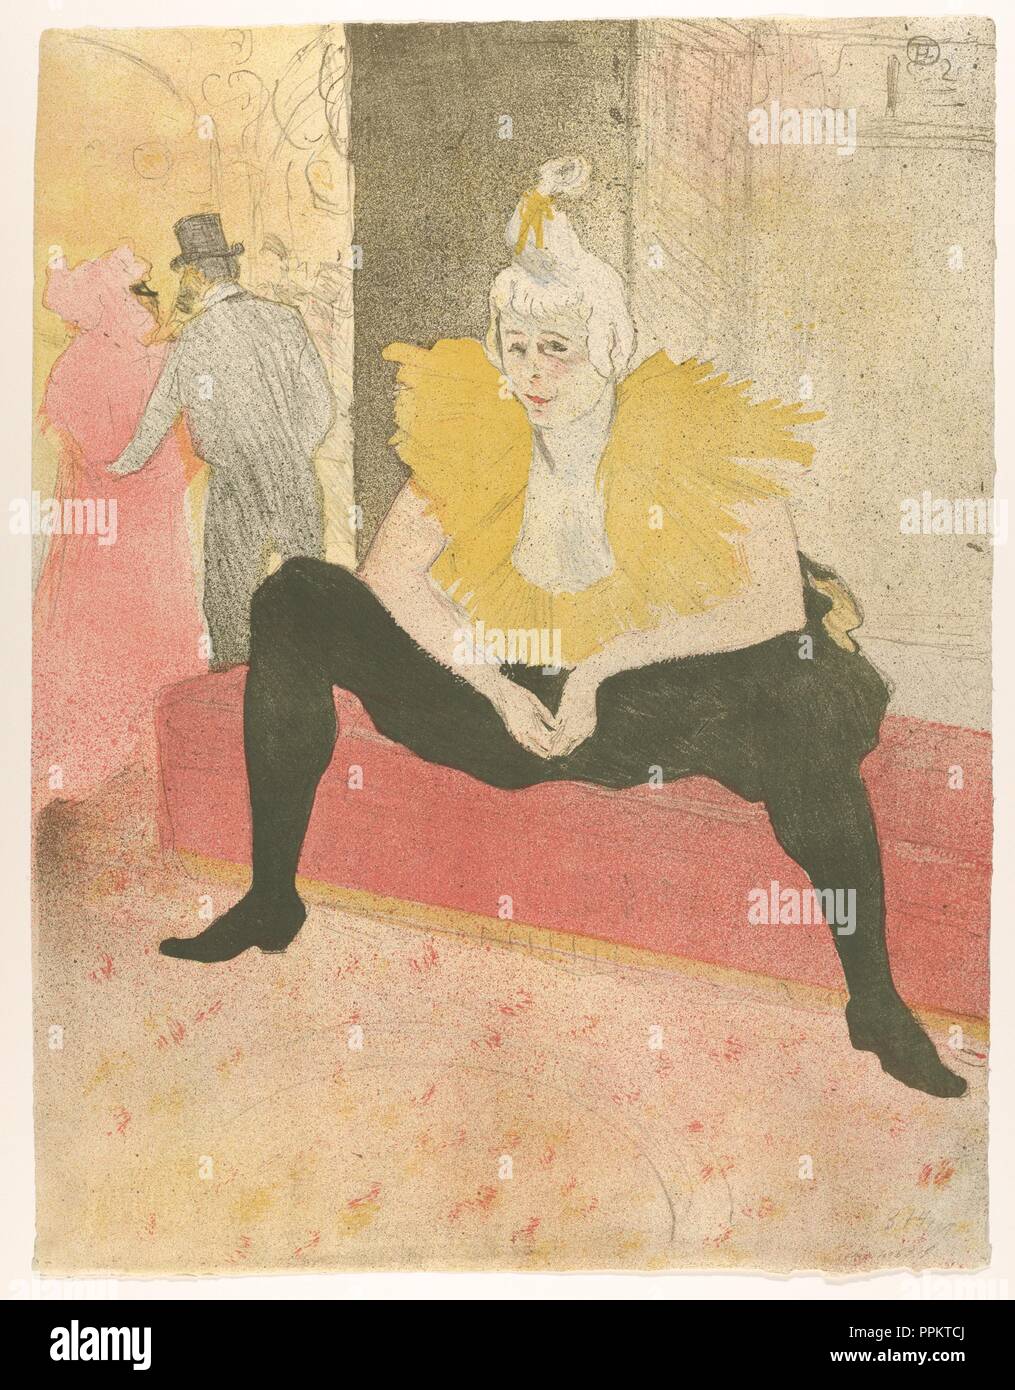 The Seated Clowness (Mademoiselle Cha-u-ka-o) (from the series Elles). Artist: Henri de Toulouse-Lautrec (French, Albi 1864-1901 Saint-André-du-Bois). Dimensions: Image: 20 9/16 × 15 13/16 in. (52.2 × 40.1 cm)  Sheet: 20 9/16 x 15 13/16 in. (52.2 x 40.1 cm). Publisher: Gustave Pellet (French, Paris 1859-1919 Paris). Series/Portfolio: Elles, 1896. Date: 1896. Museum: Metropolitan Museum of Art, New York, USA. Stock Photo